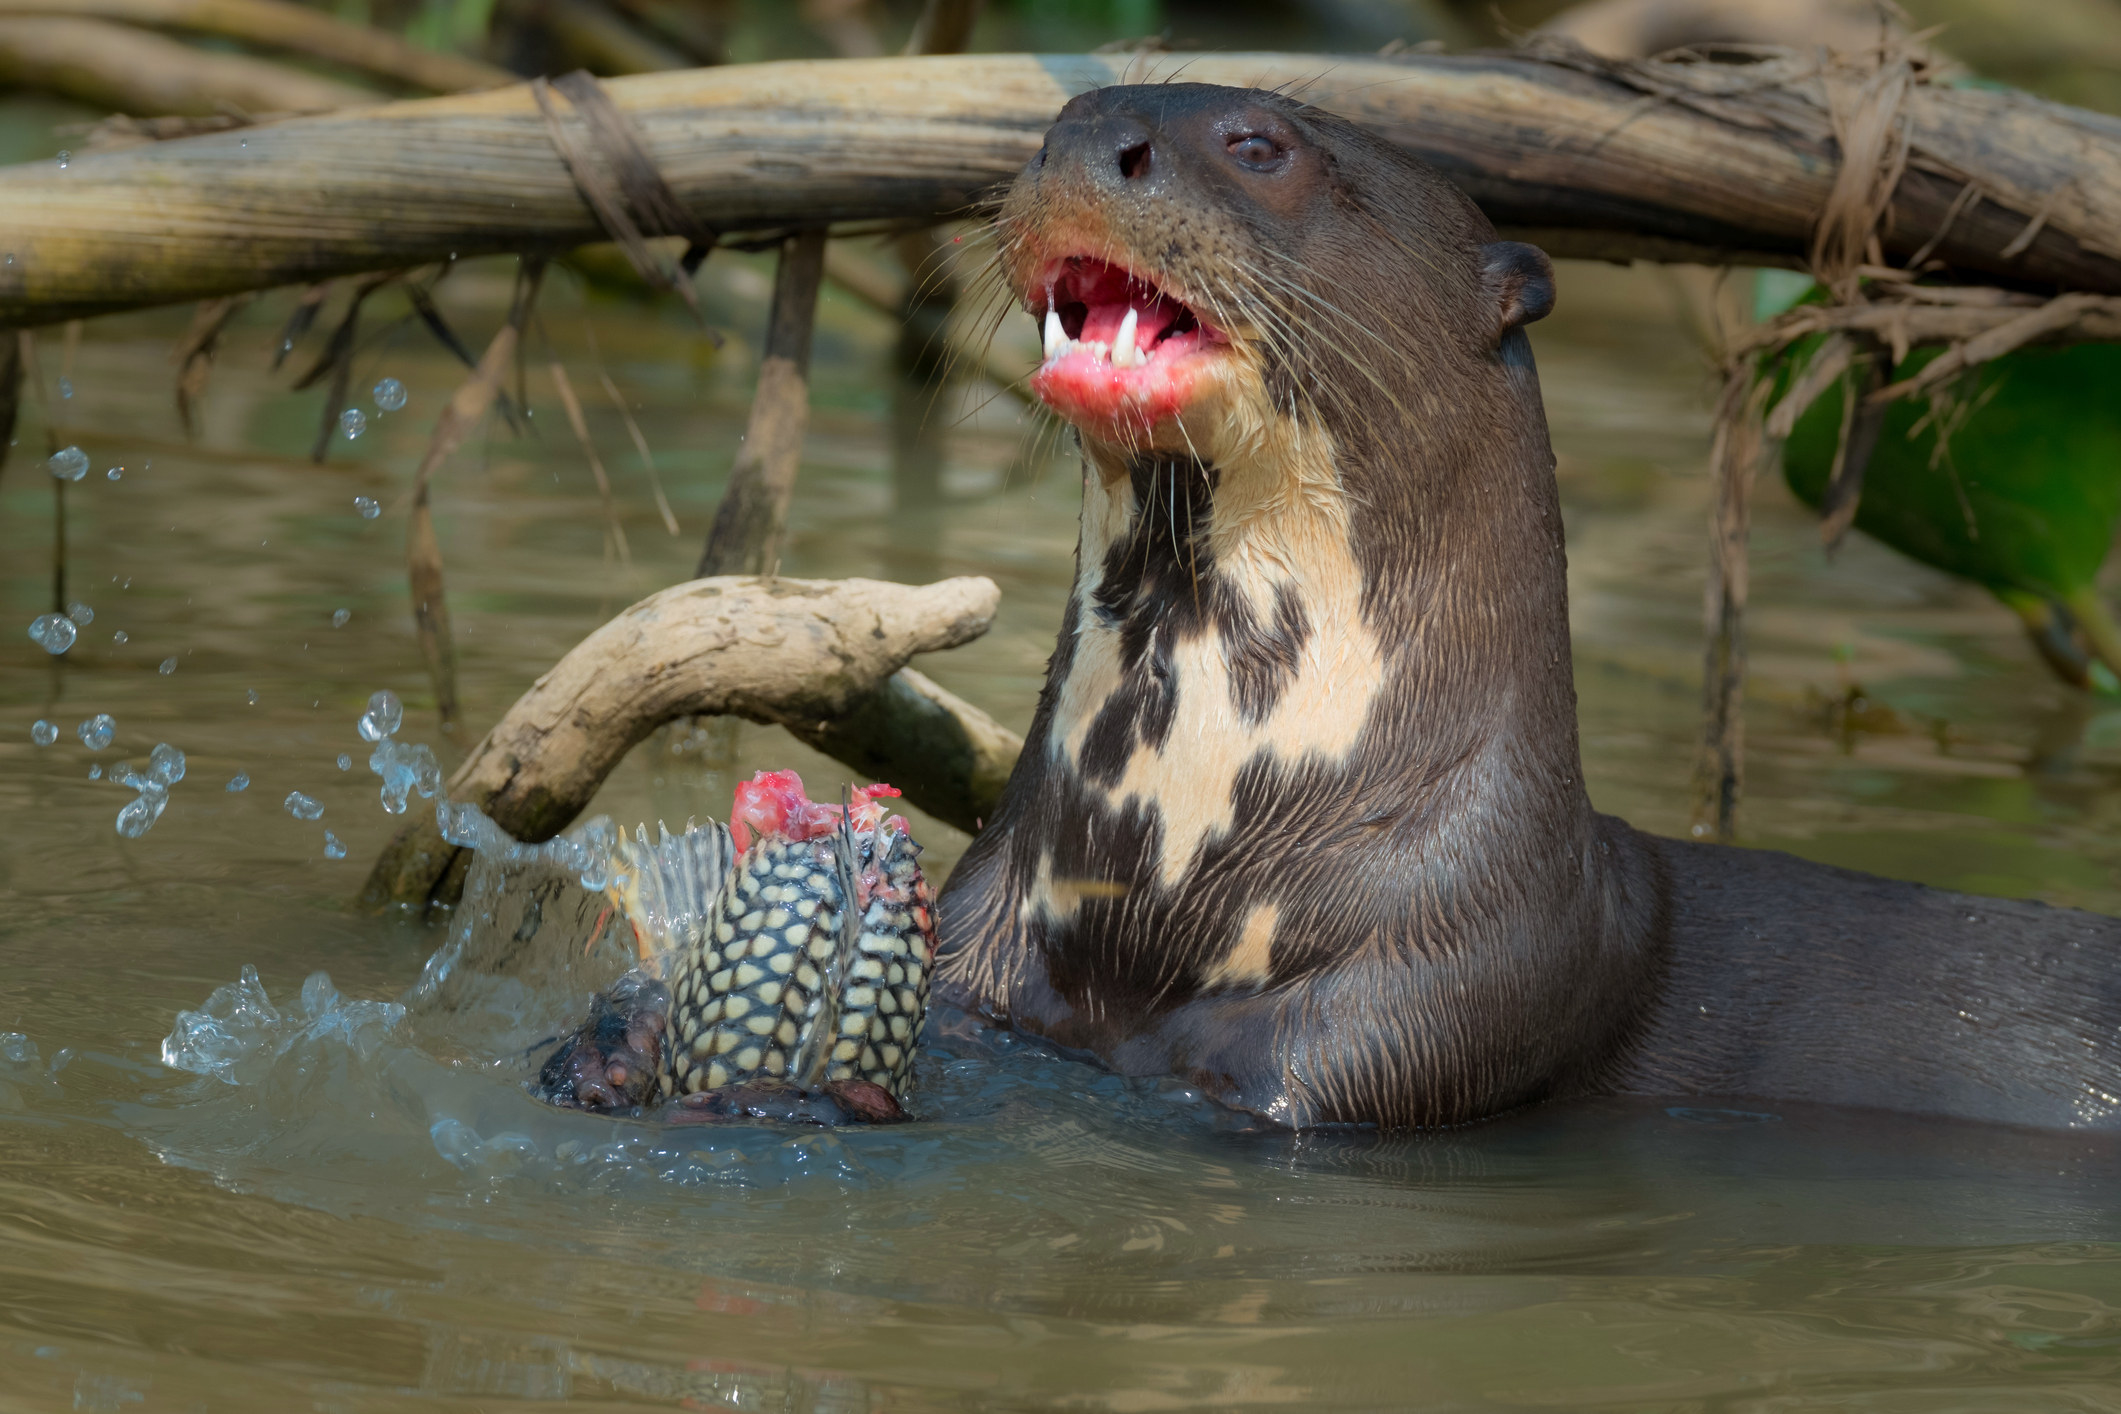 A giant river otter eating a fish